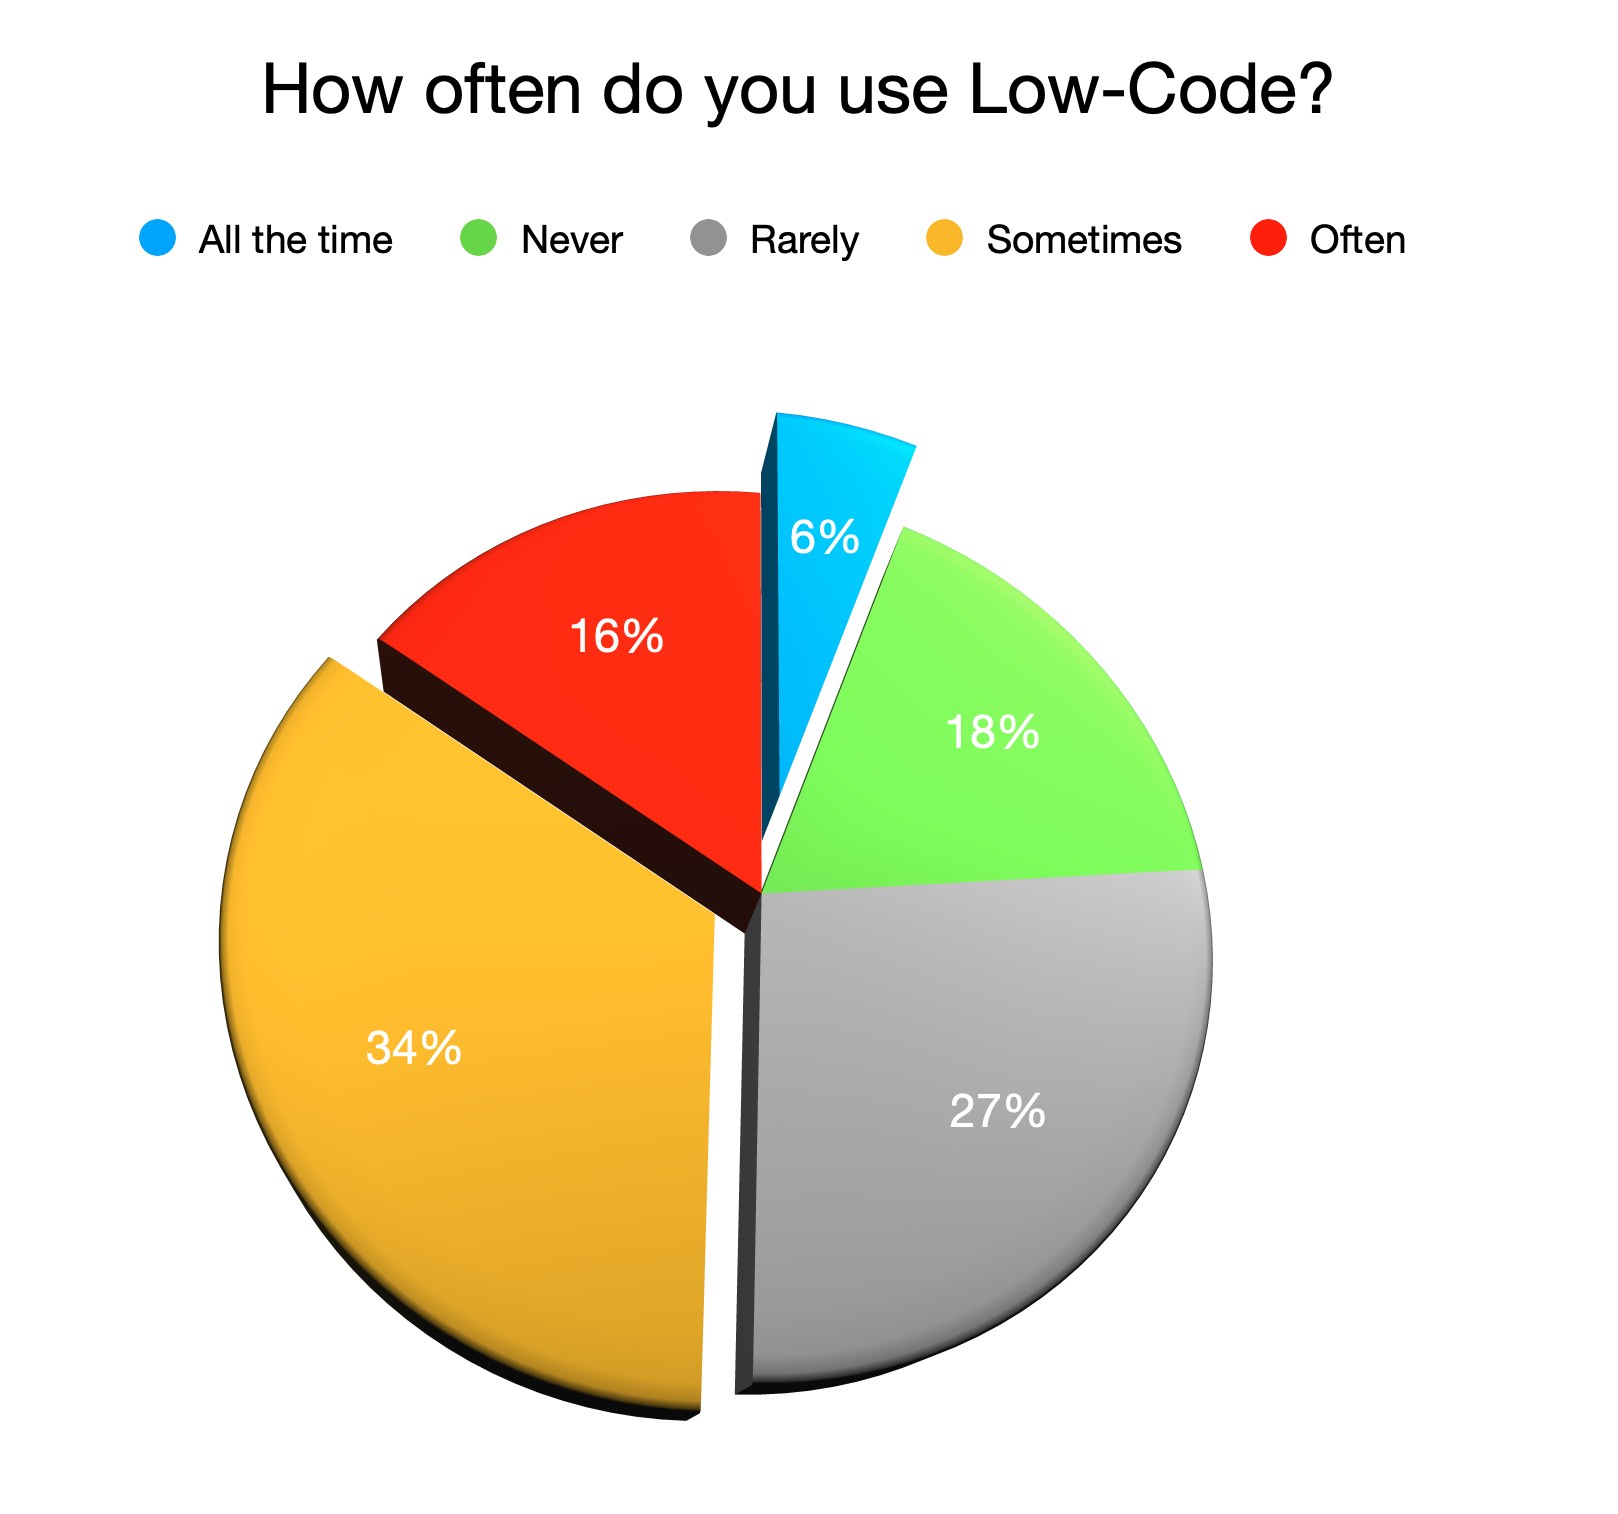 How often do you use Low-Code